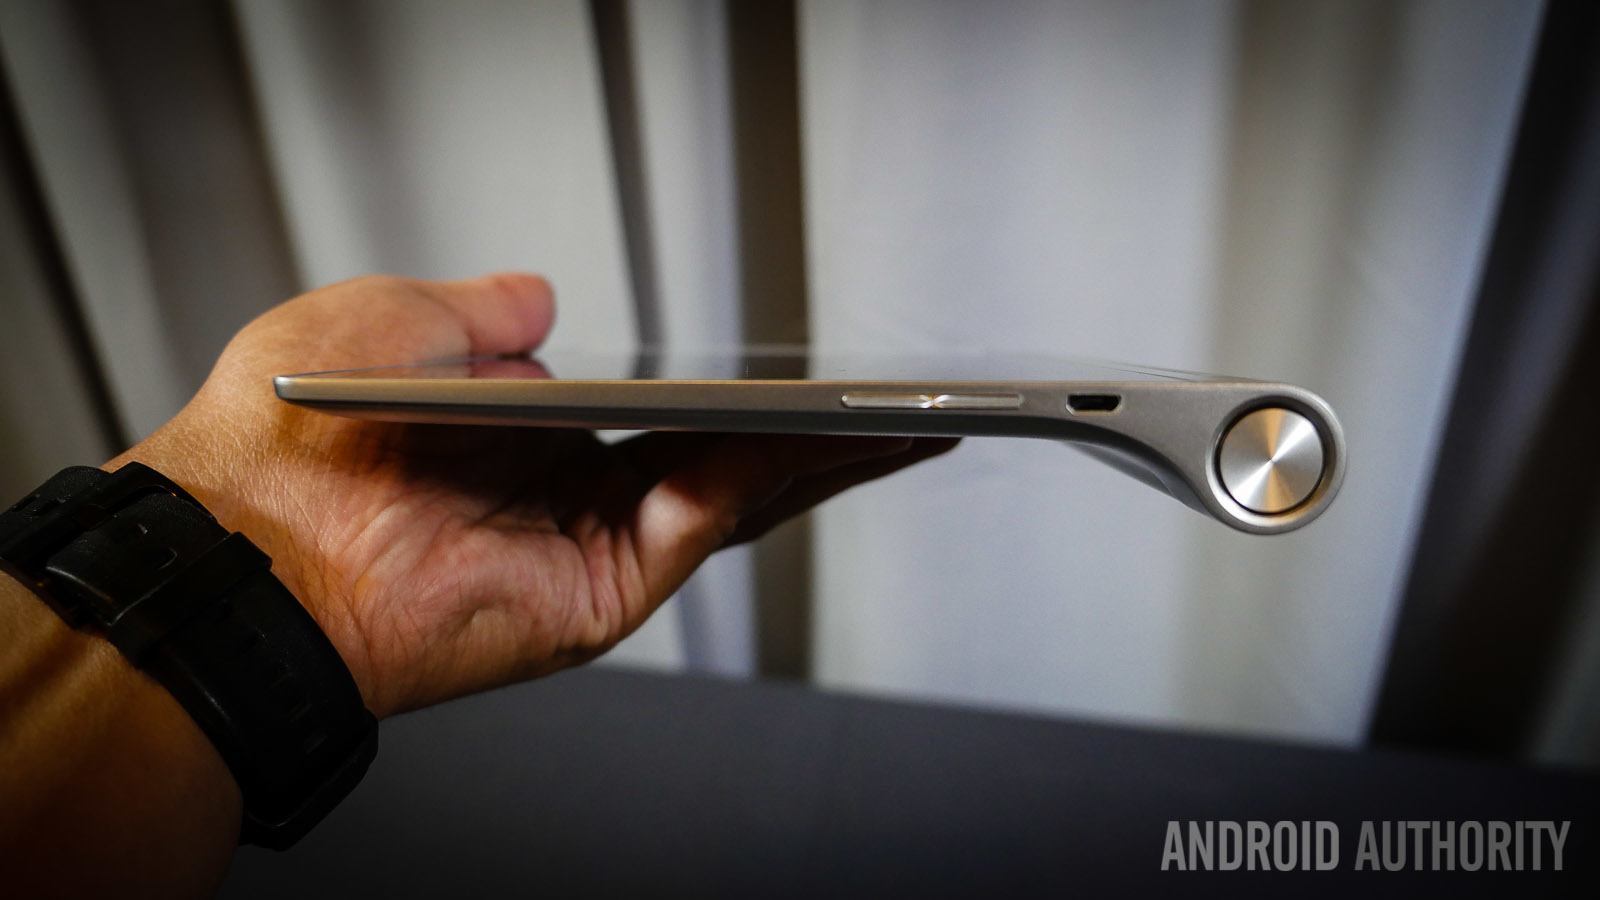 lenovo yoga tablet 2 8 and 10 first look aa (12 of 24)